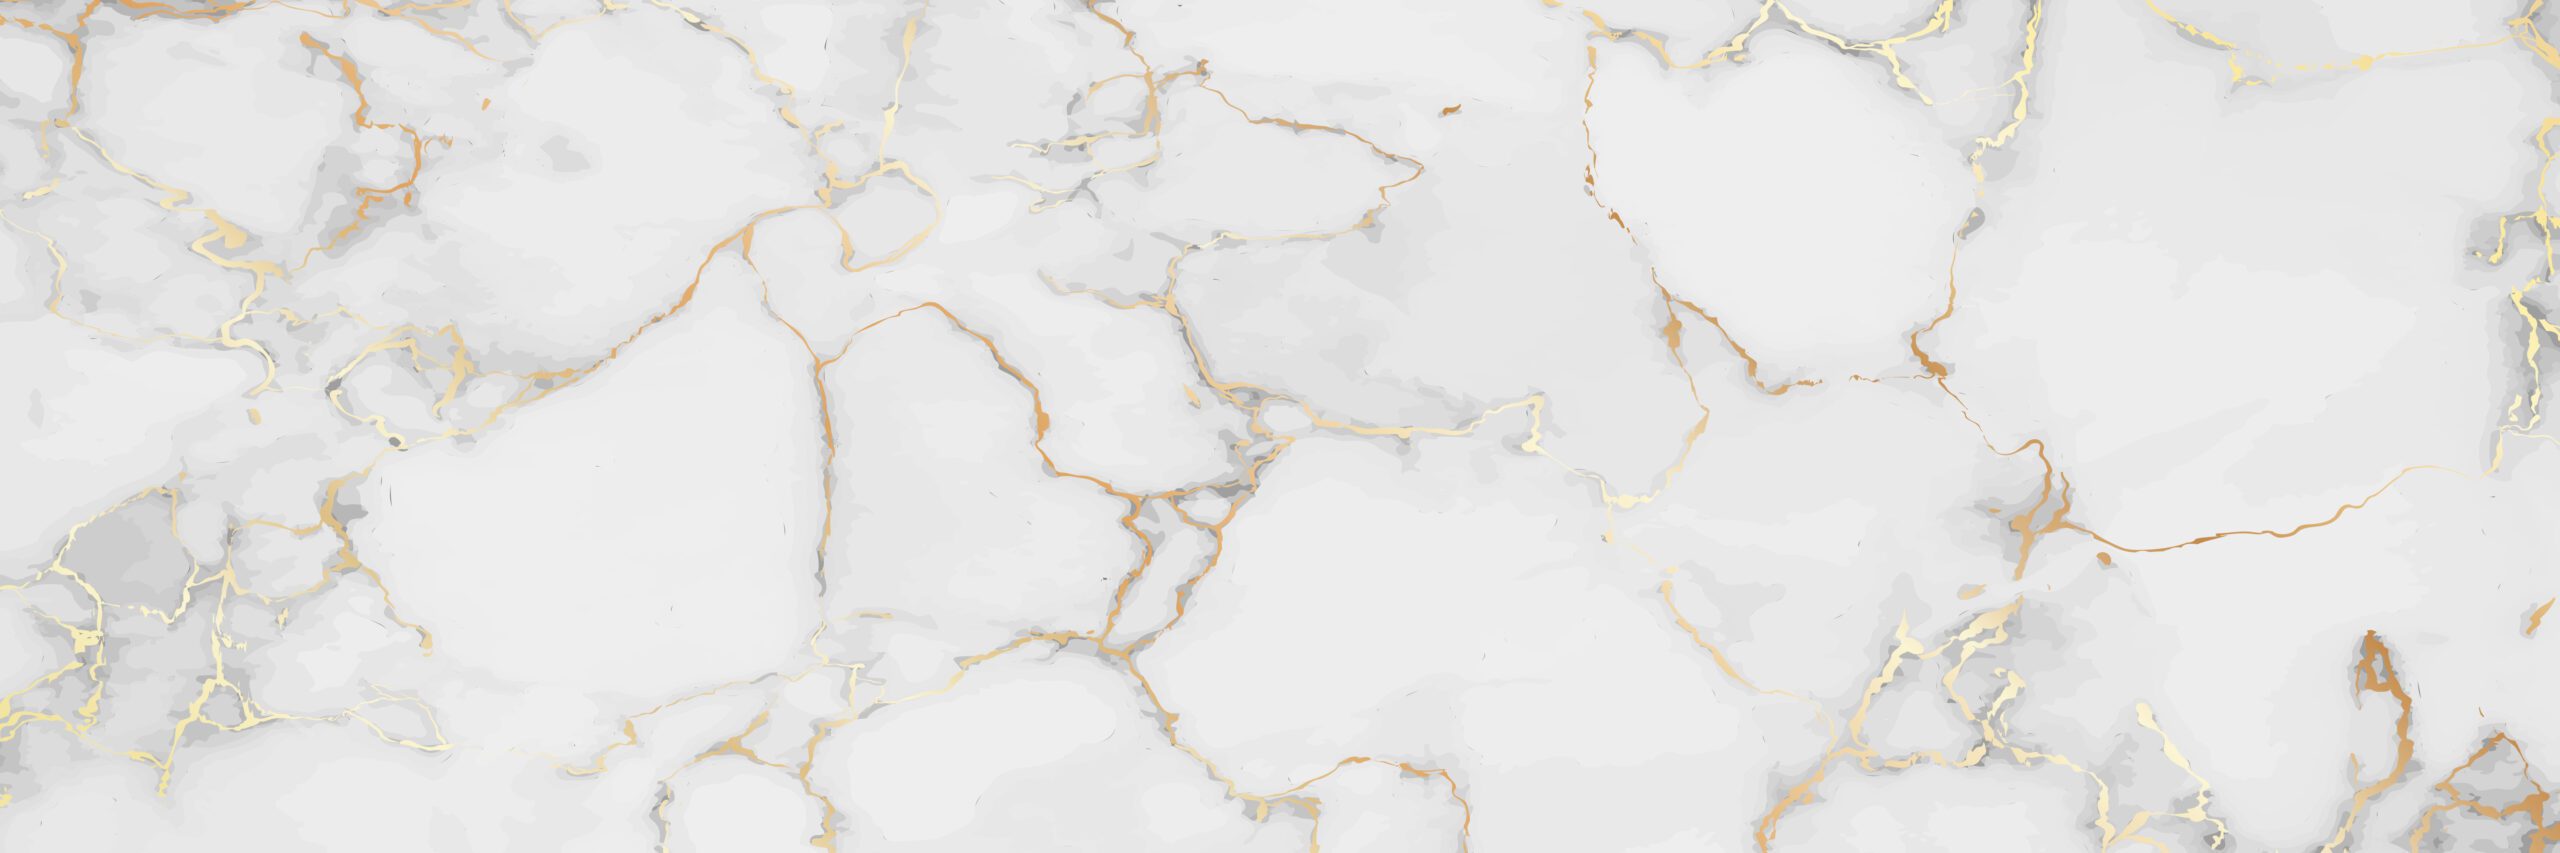 White Marble Gold Texture background